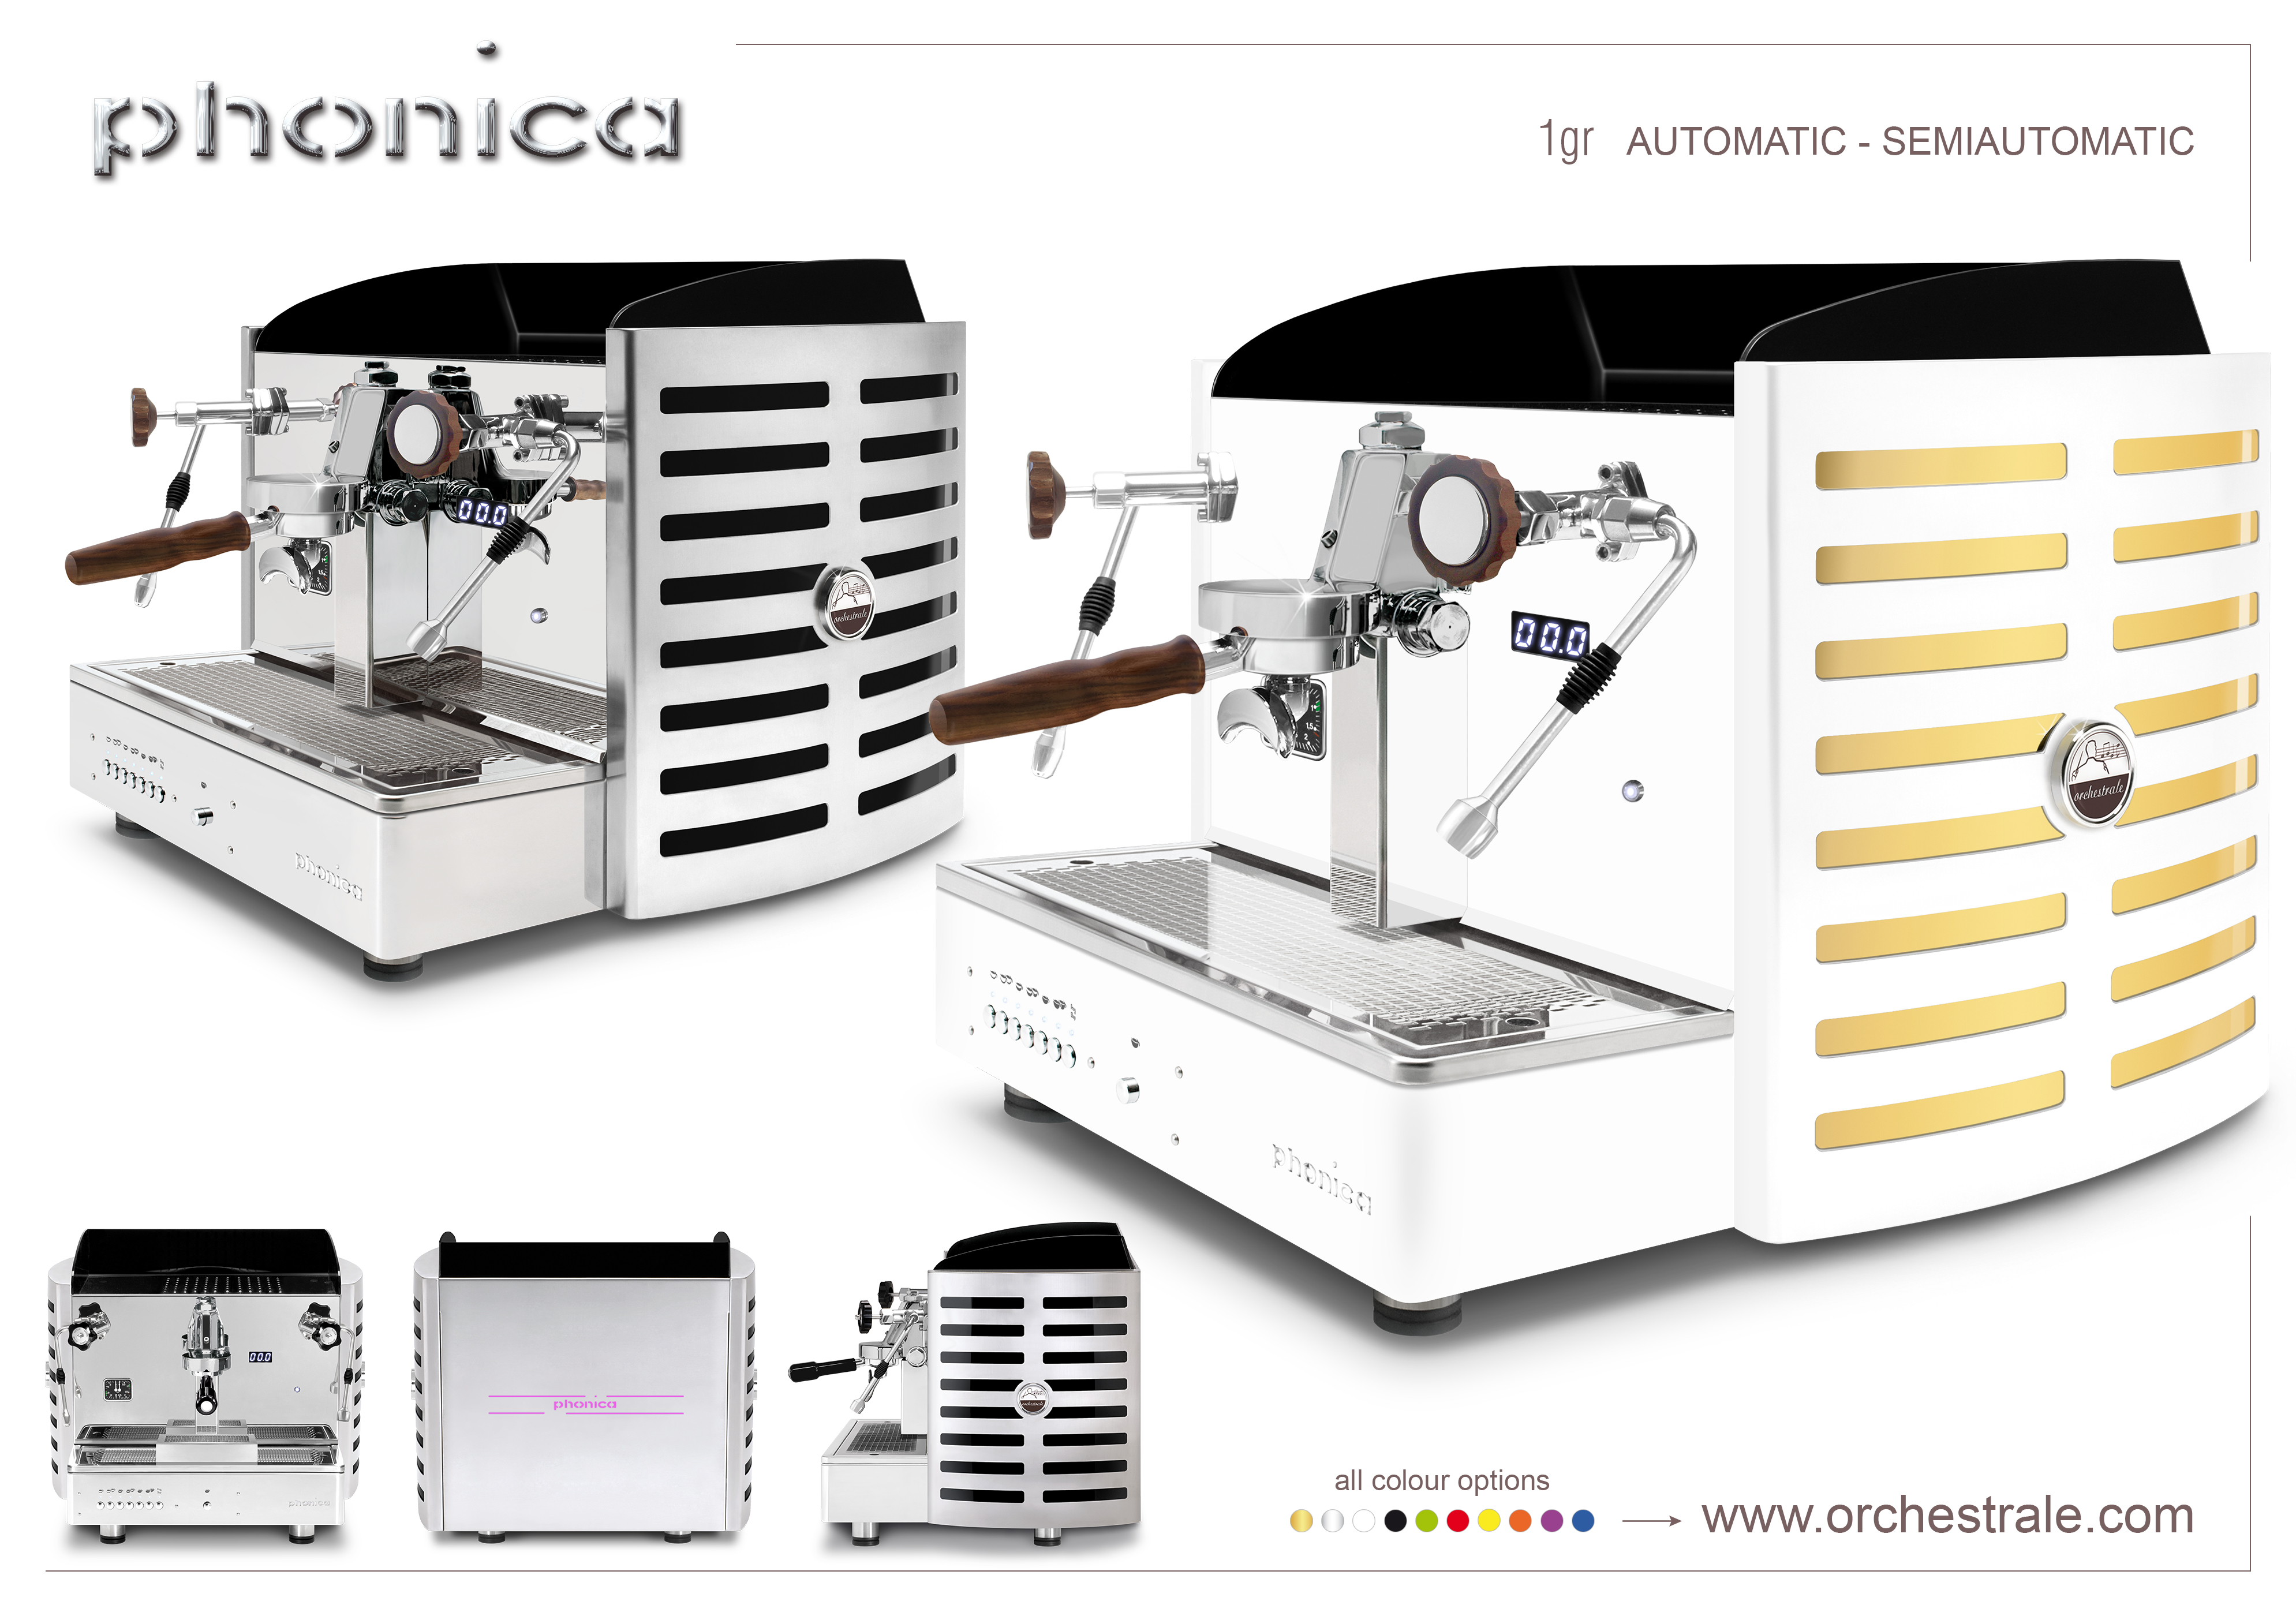 Phonica 1gr automatic - semiautomatic